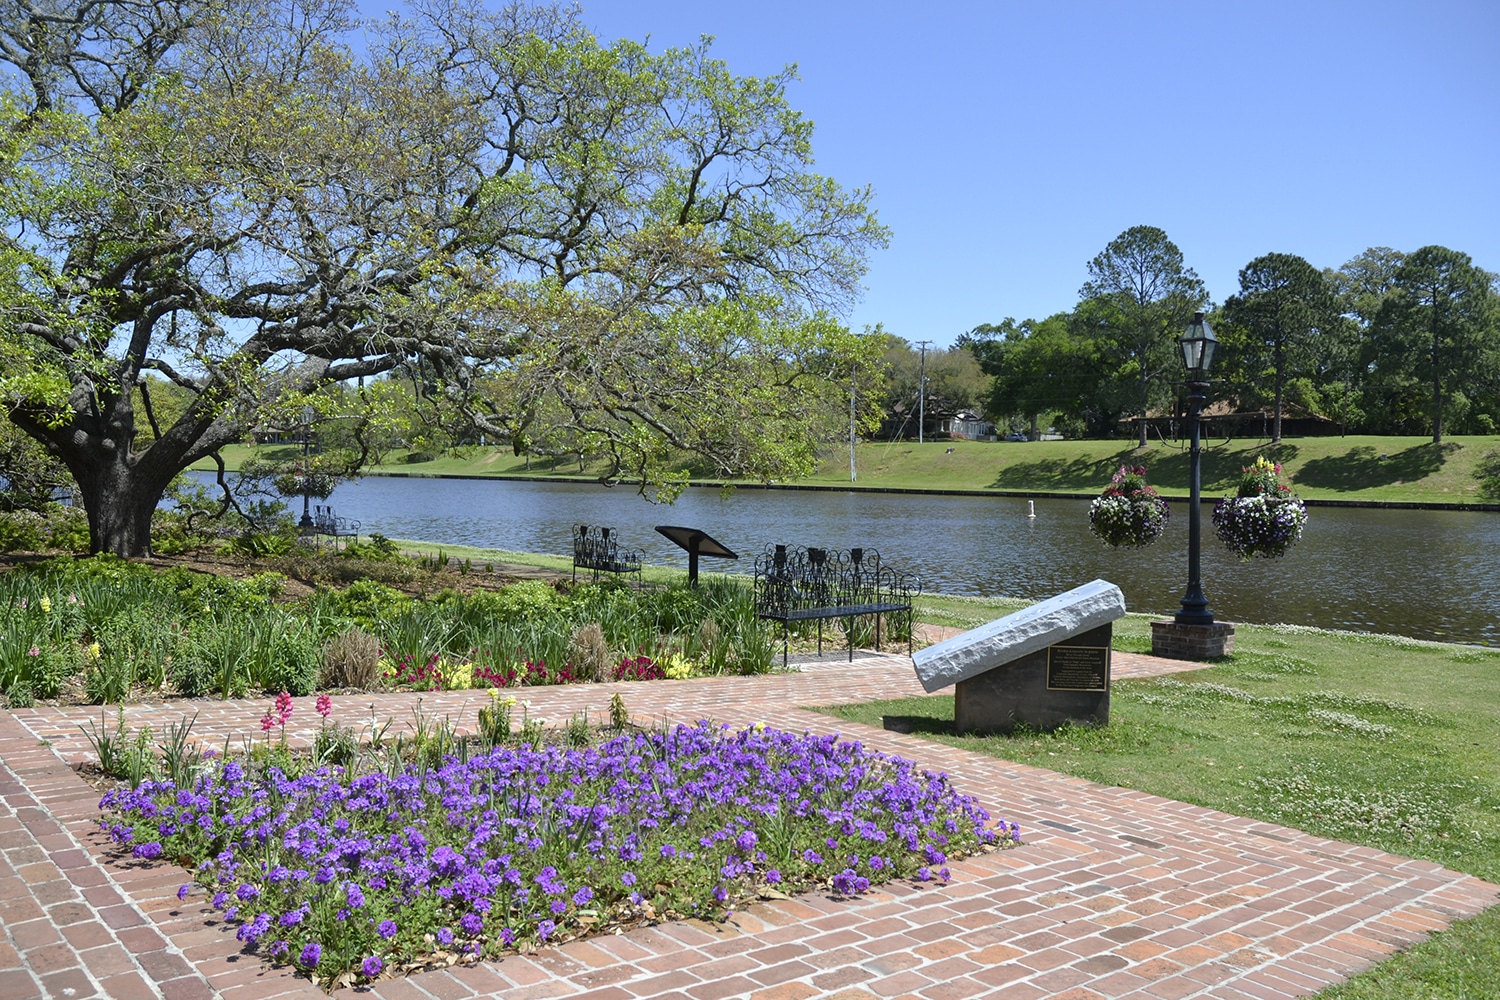 Things to do in Natchitoches, LA